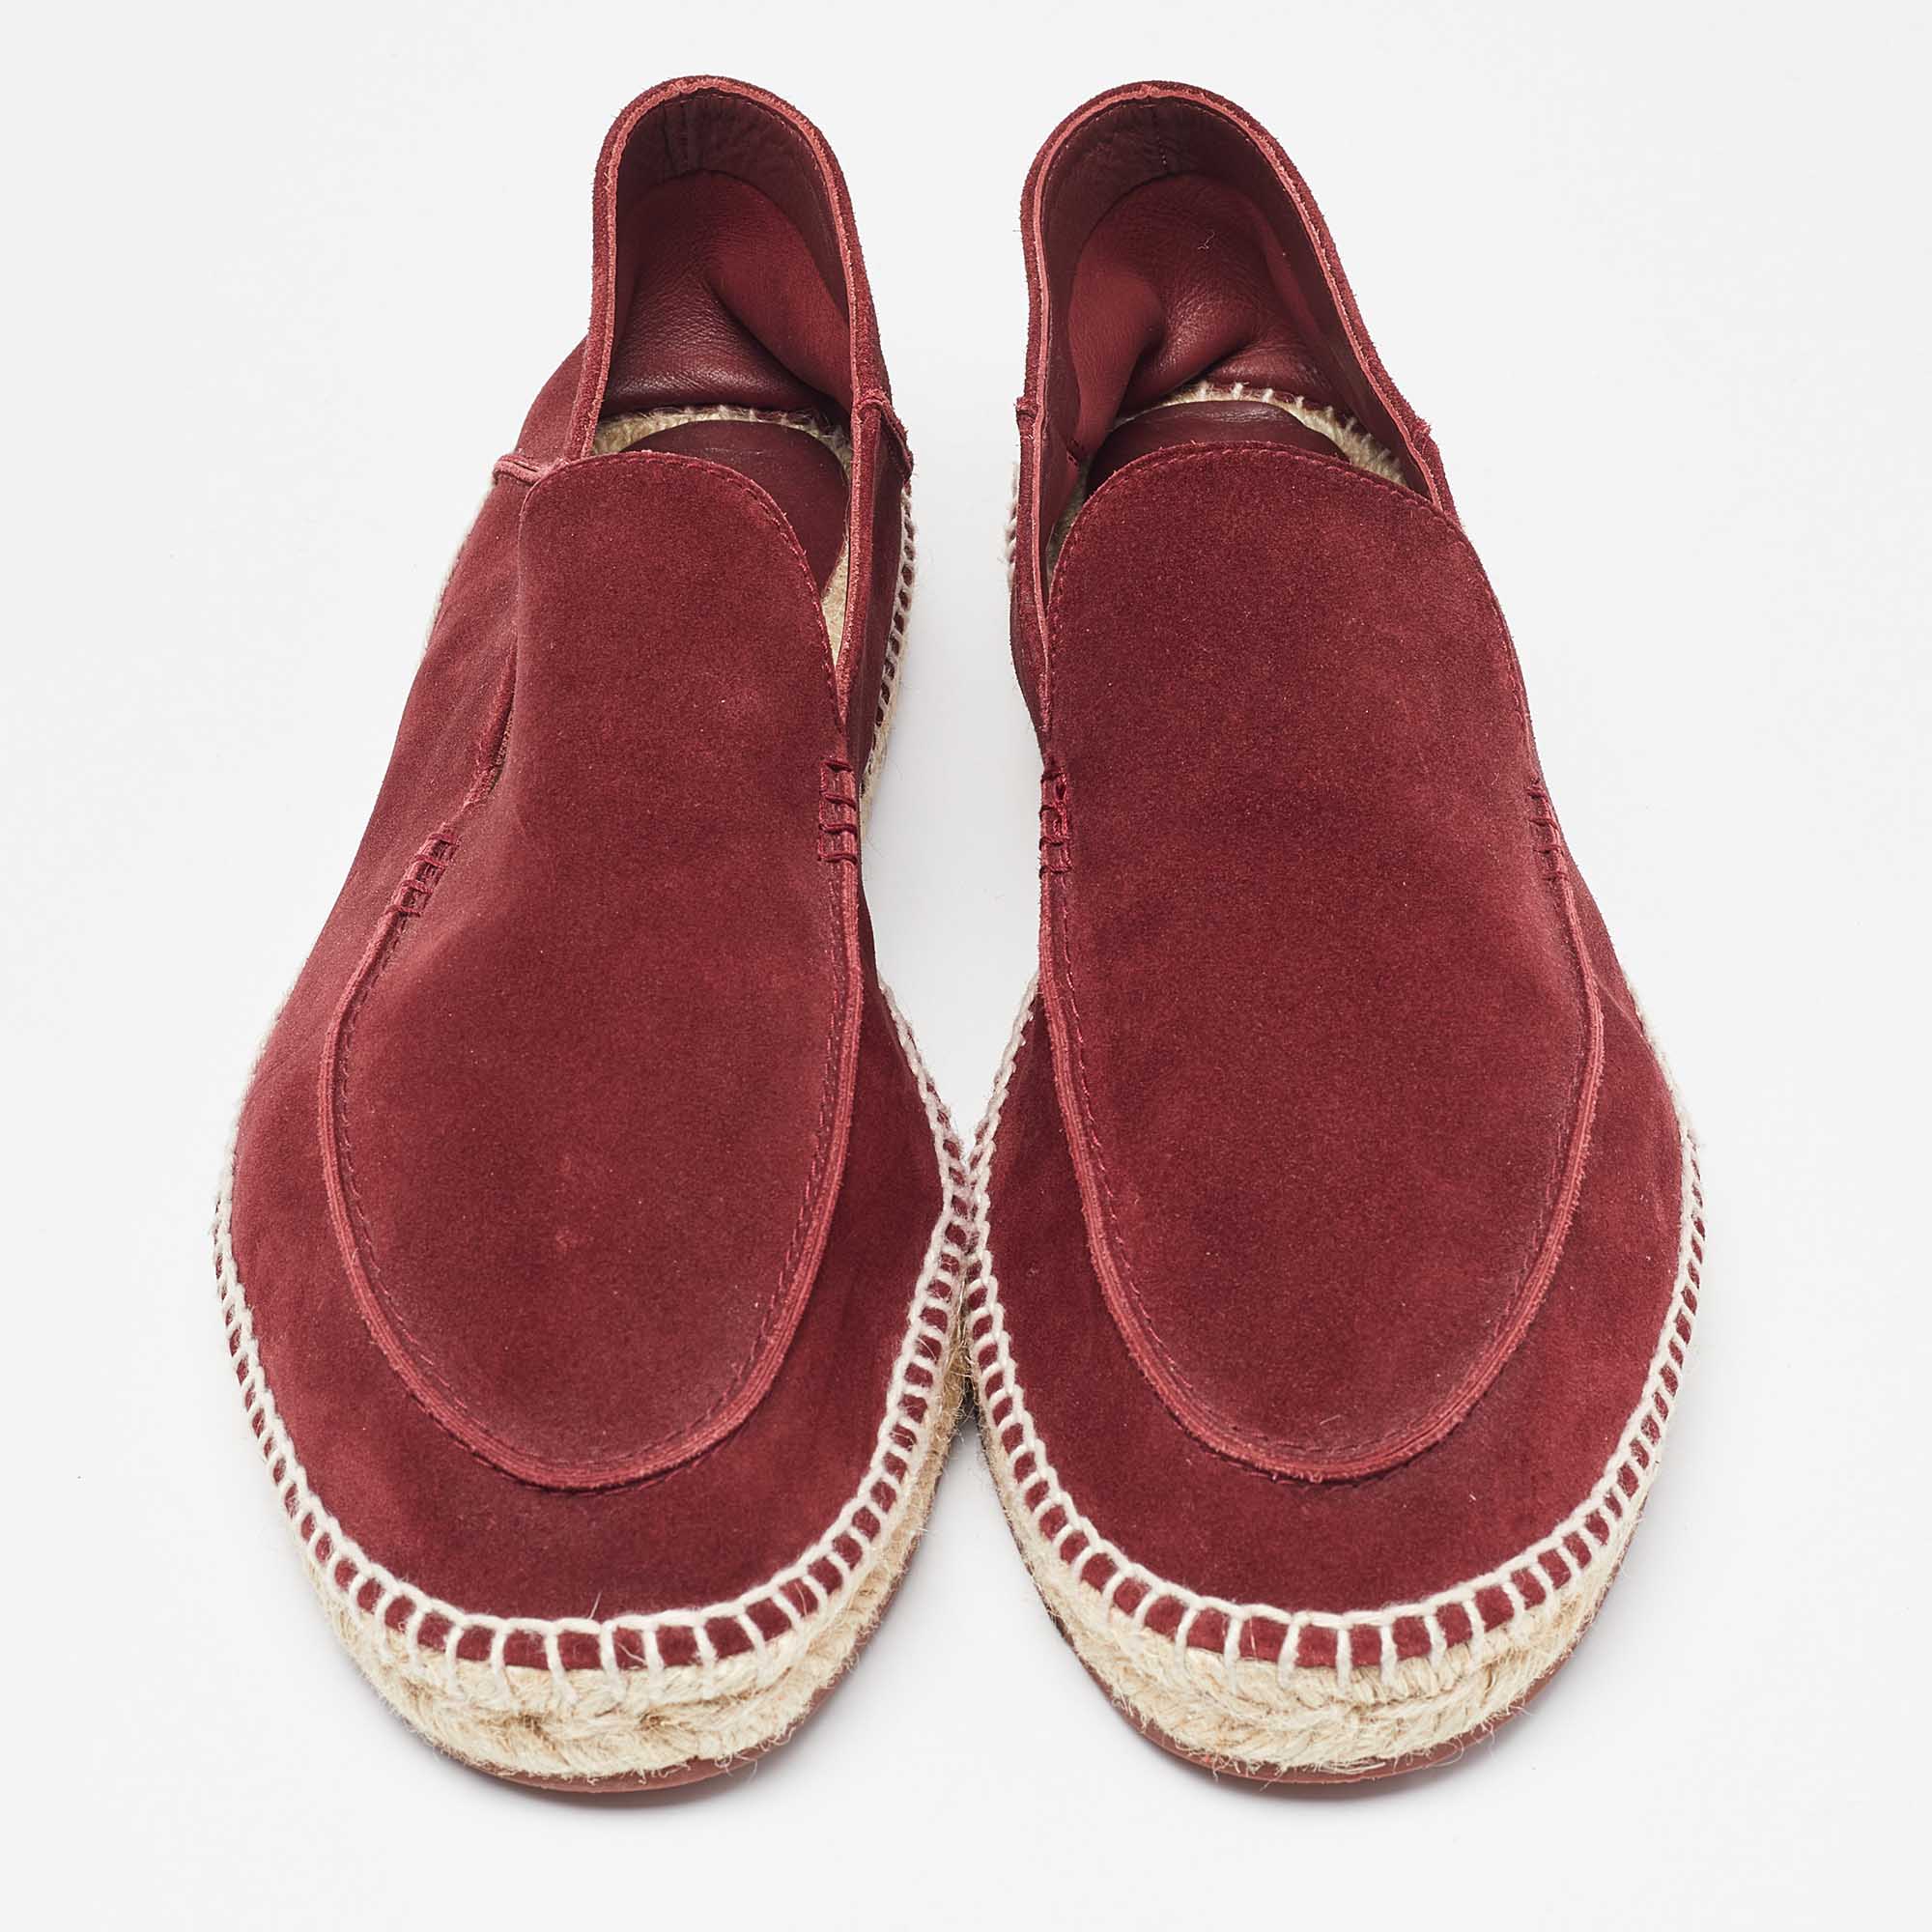 Loro Piana Burgundy Suede Collapsible Flat Espadrilles Size 45